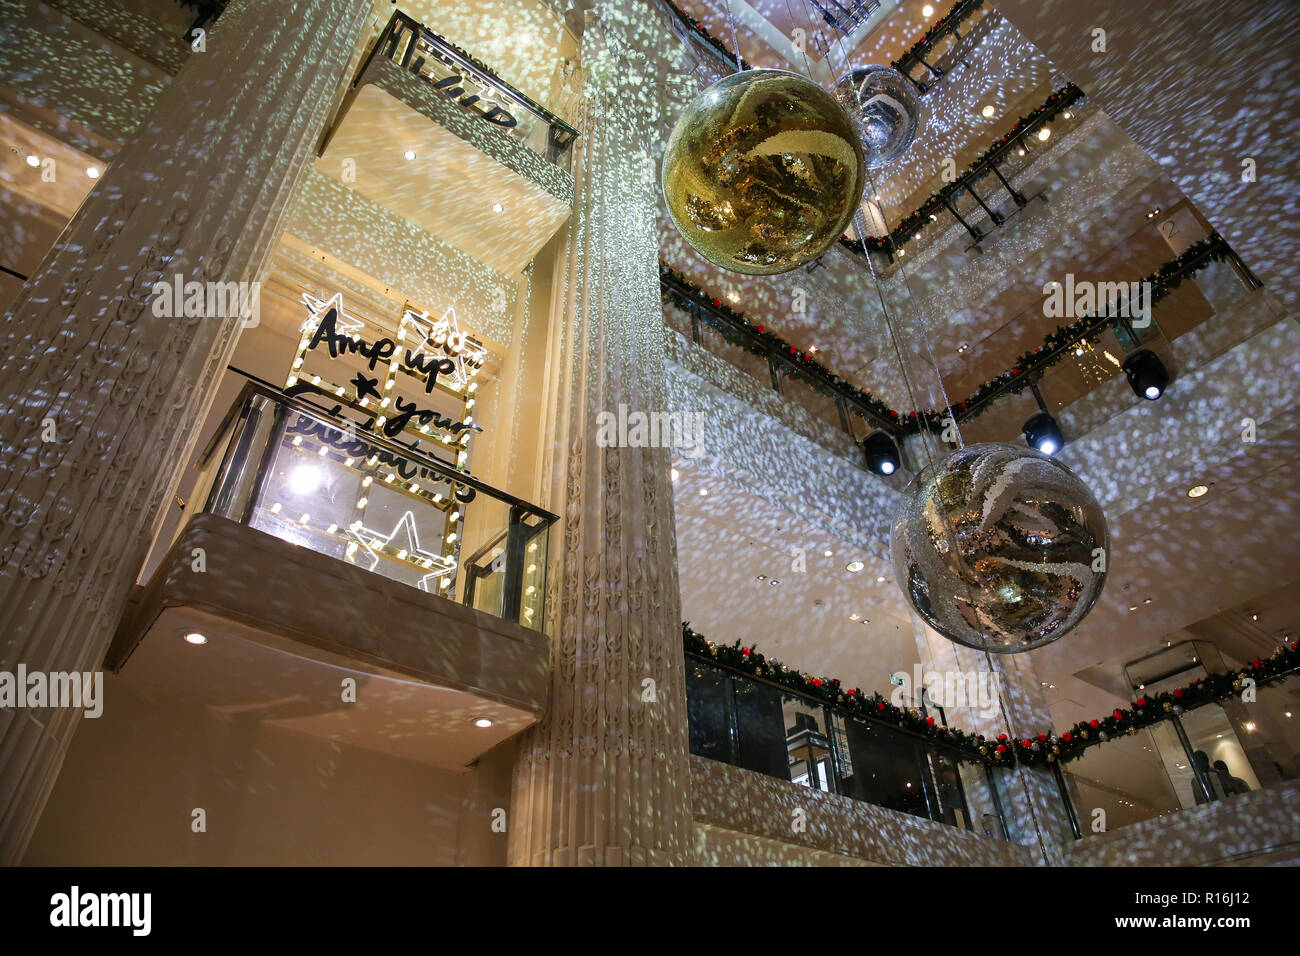 London, UK. 9th Nov, 2018. Interior view of Selfridges.Selfridges on Oxford Street, London is decorated with large glitter balls and Christmas lights for the festive season. Credit: Dinendra Haria/SOPA Images/ZUMA Wire/Alamy Live News Stock Photo